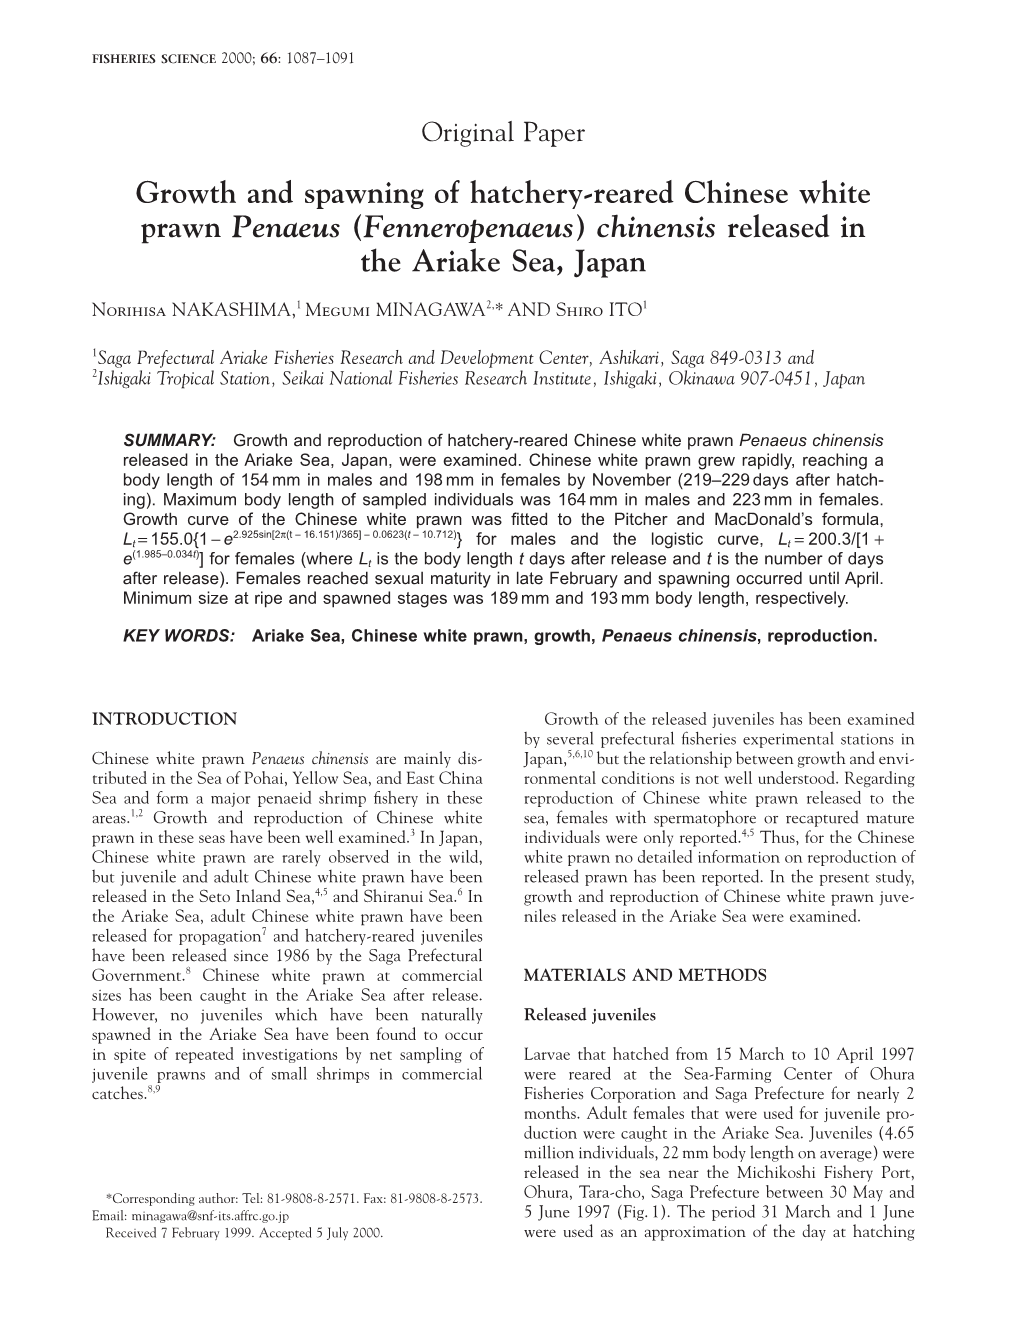 Growth and Spawning of Hatchery-Reared Chinese White Prawn Penaeus (Fenneropenaeus) Chinensis Released in the Ariake Sea, Japan